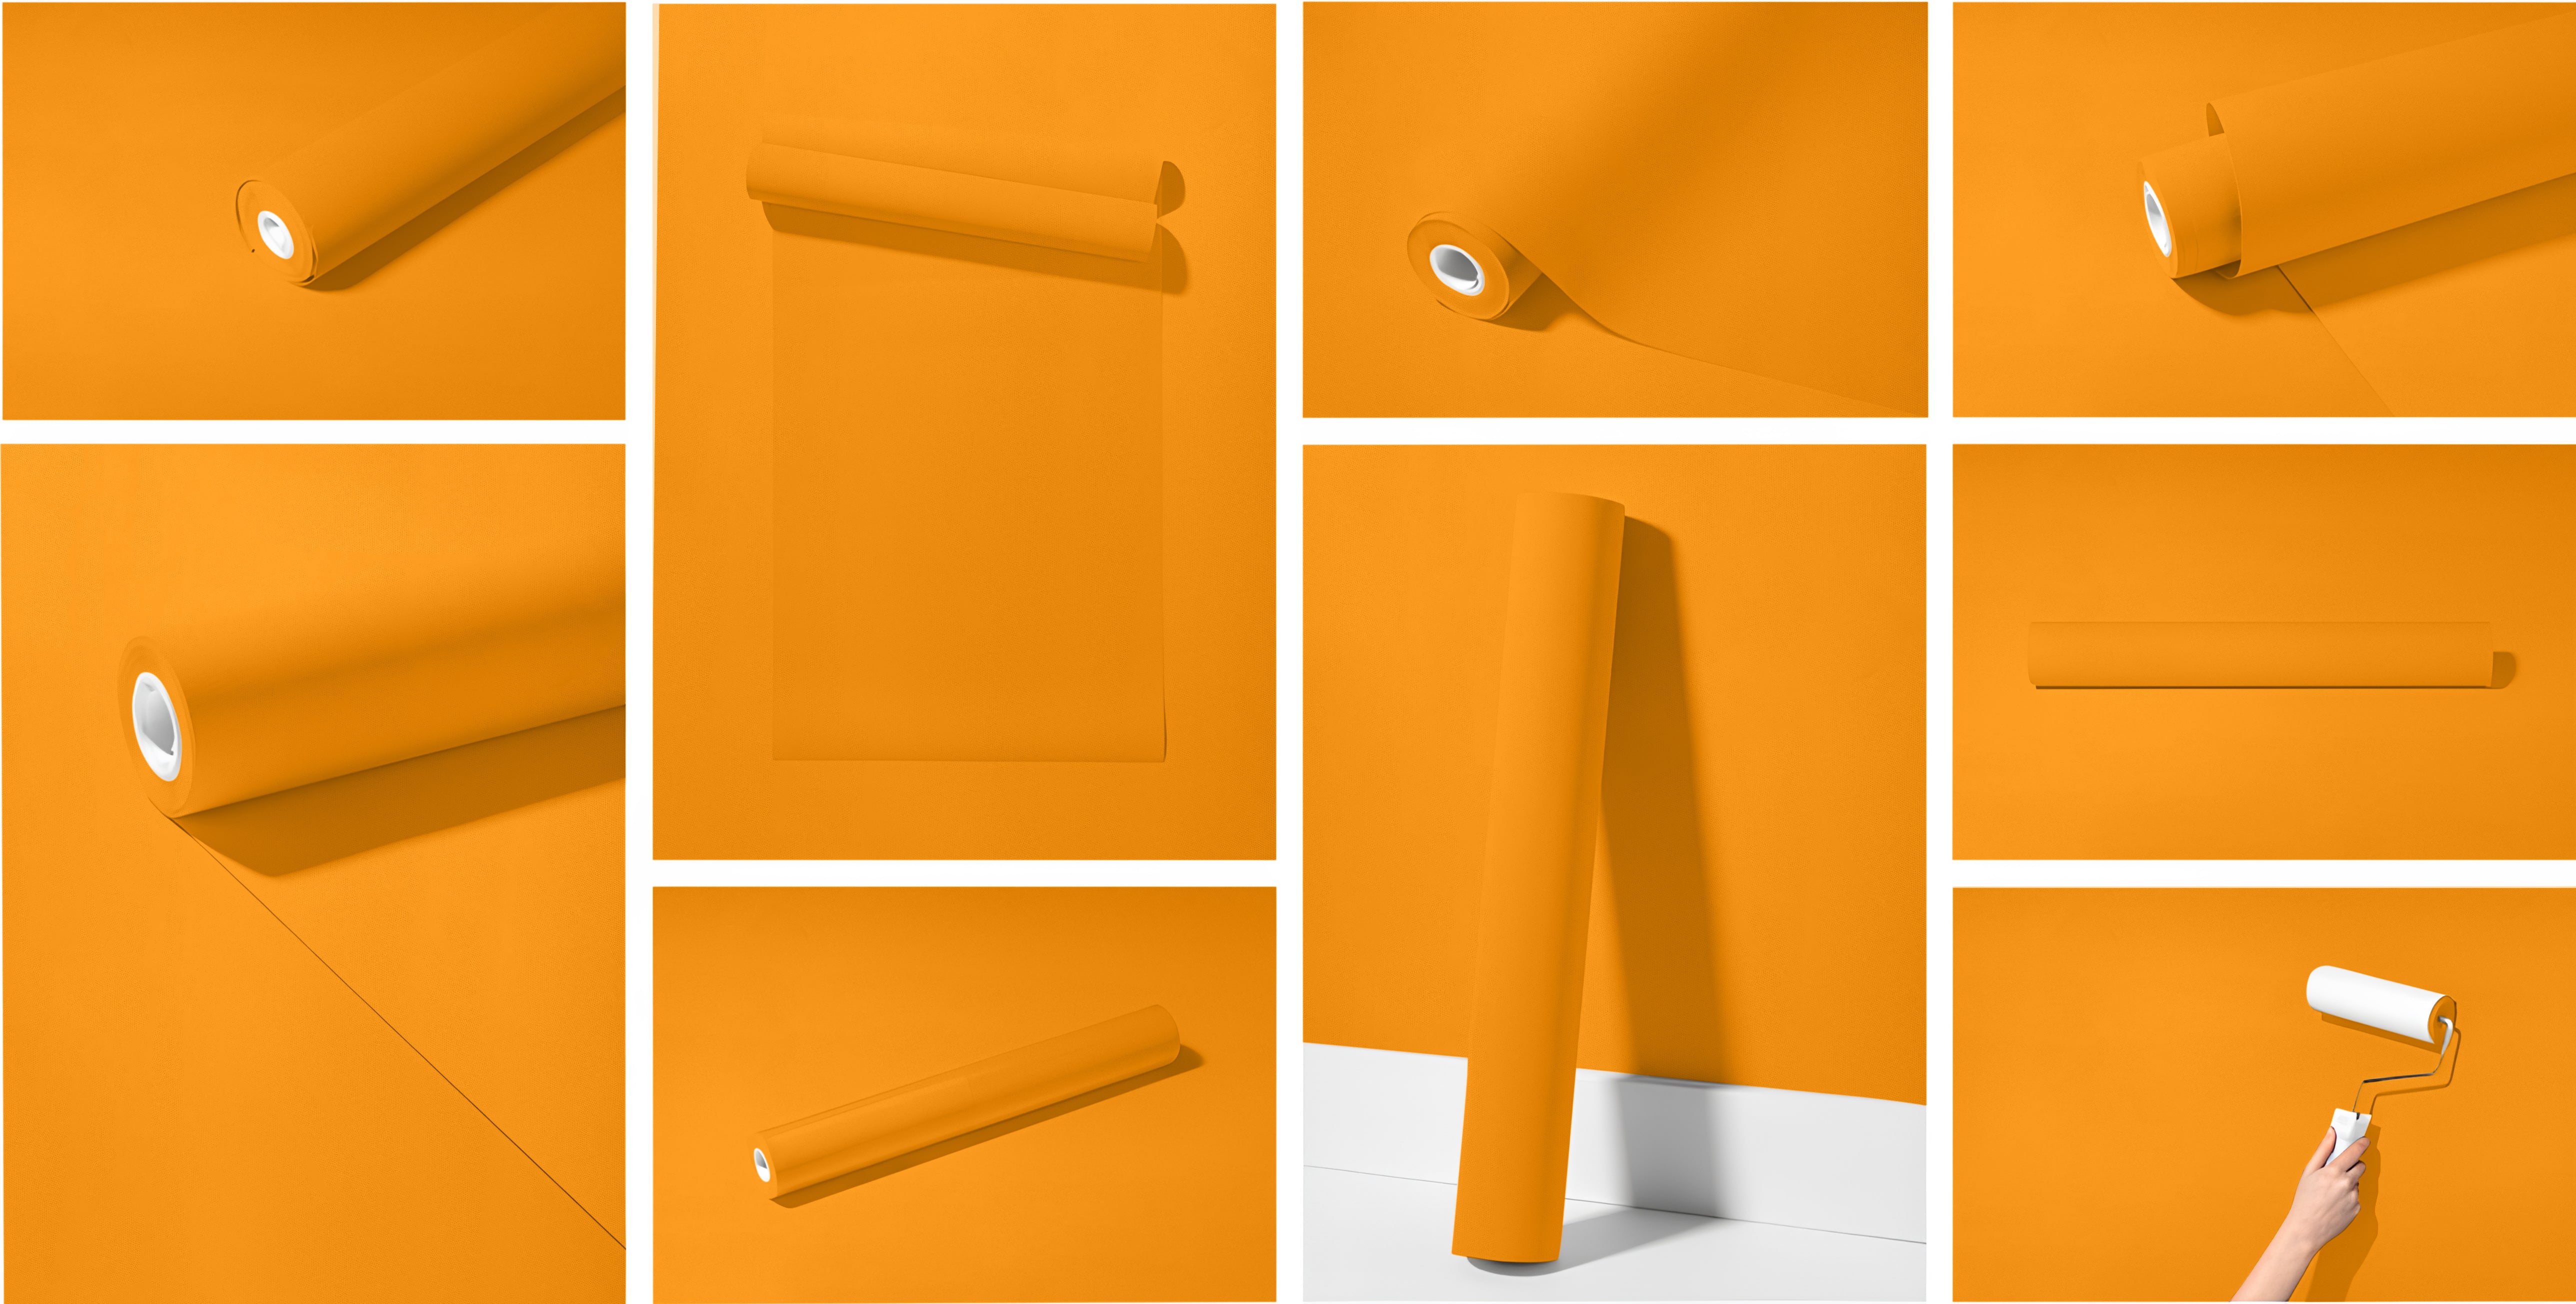 Peel & Stick Removable Re-usable Paint - Color RAL 1033 Dahlia Yellow - offRAL™ - RALRAW LLC, USA